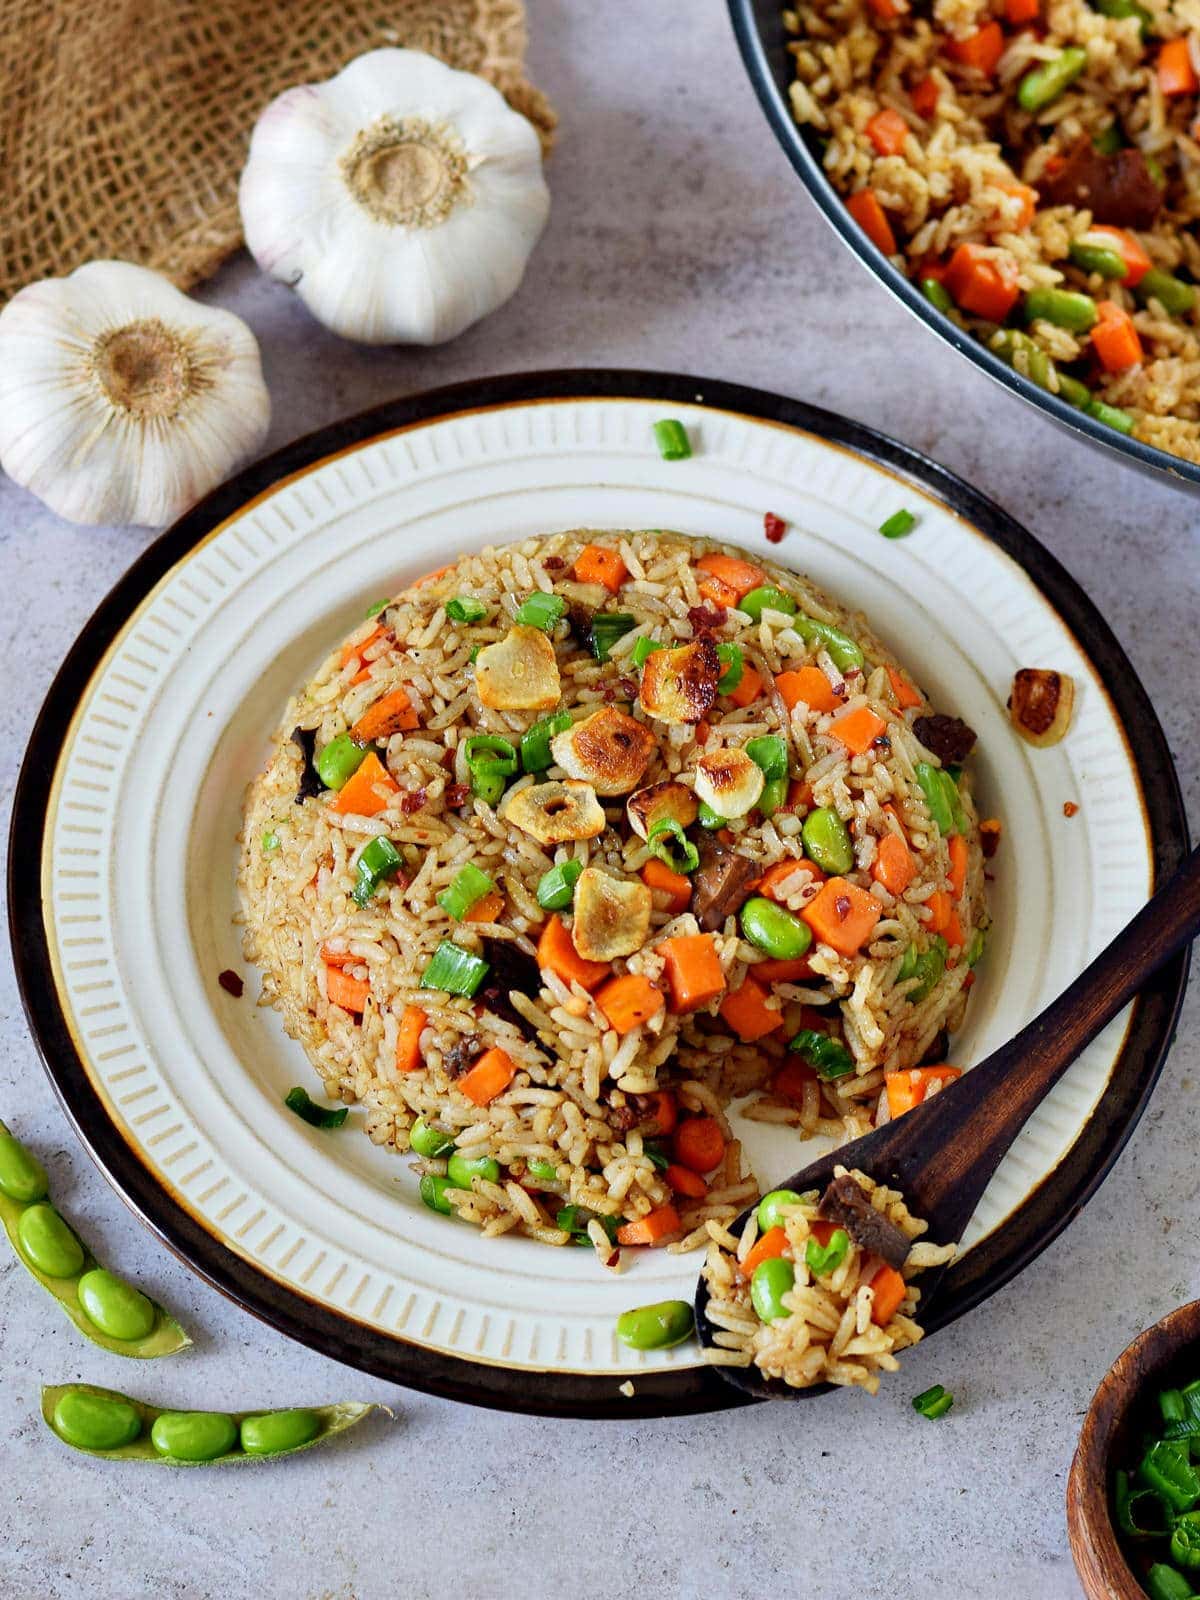 Japanese garlic fried rice with veggies on plate with wodden spoon